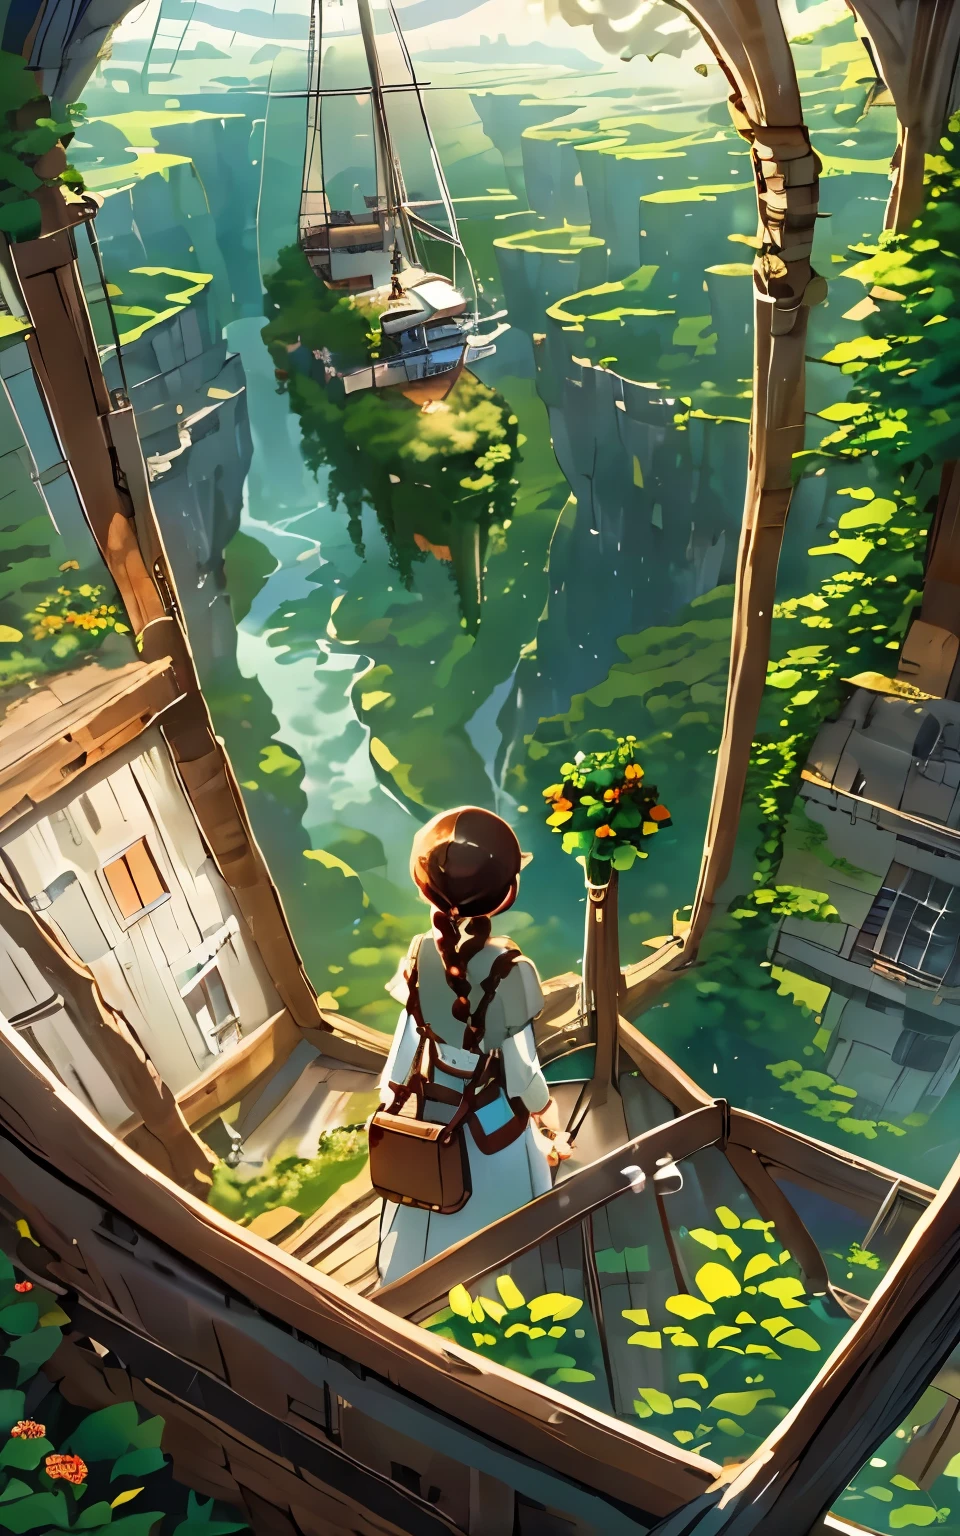 realistic depiction、one girl、Braid、While traveling by airship:1.3、spectacular view from the window、A mysterious different world、The forest spreading out below、